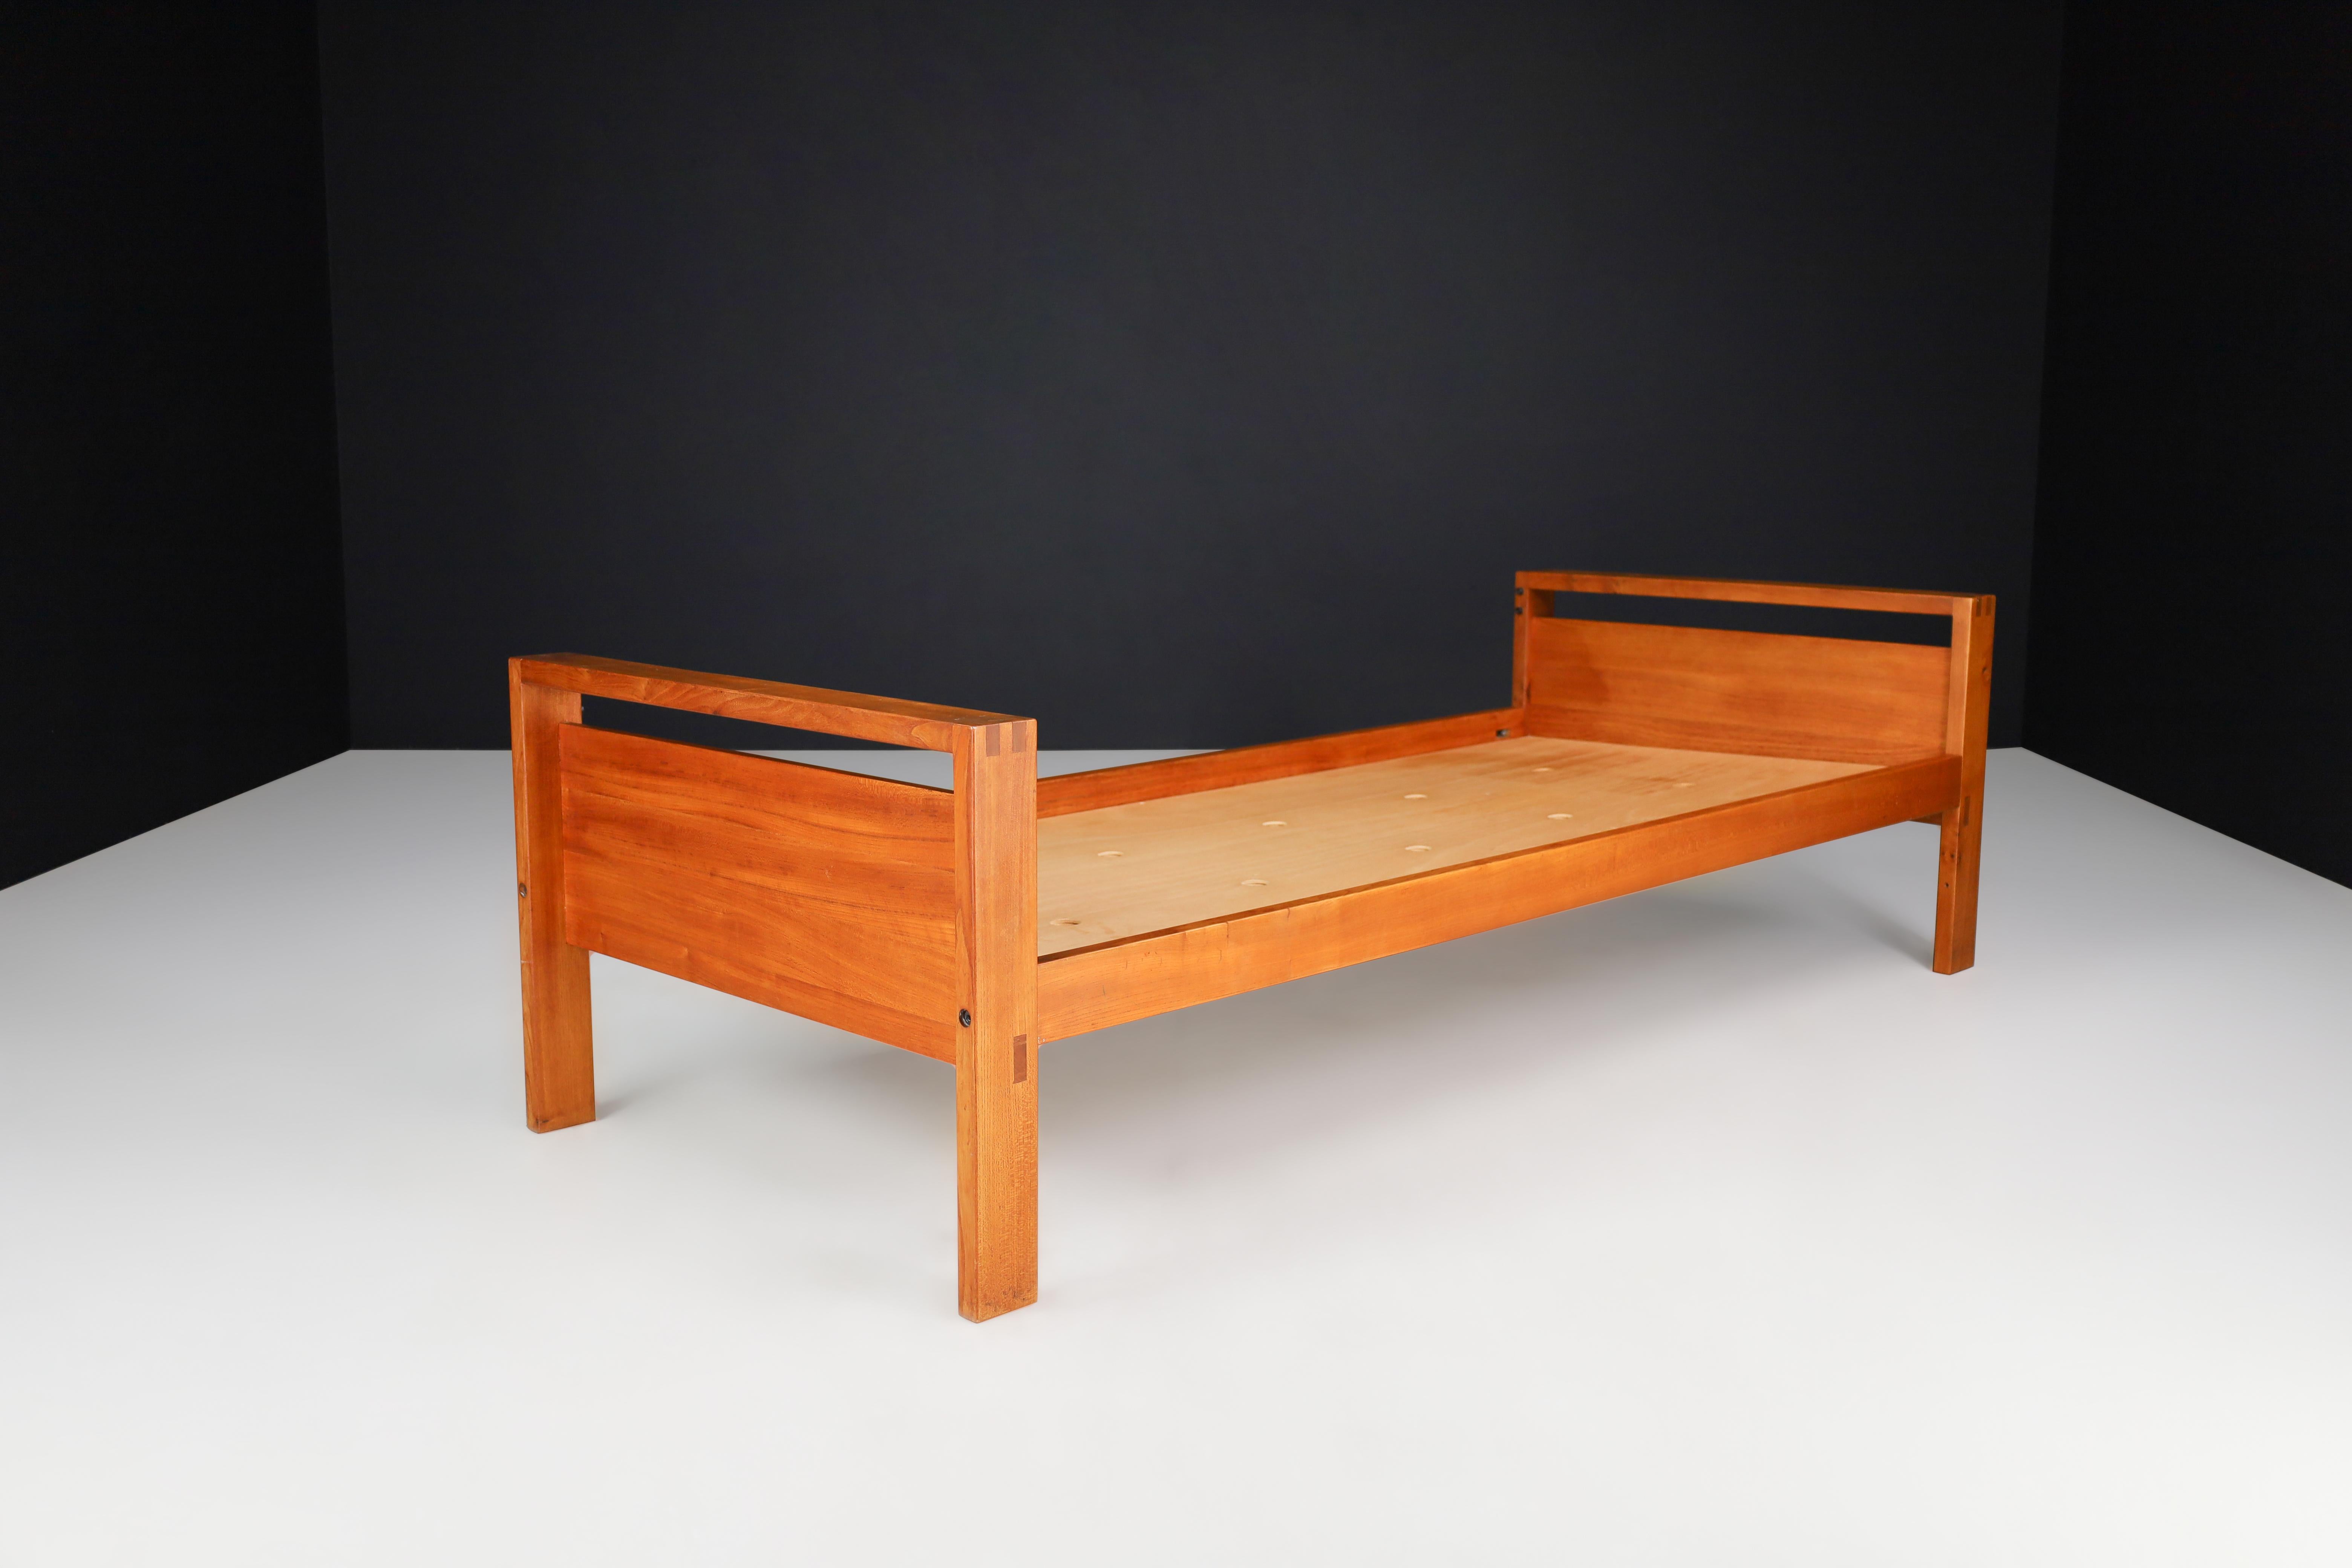 20th Century Midcentury Pierre Chapo Lo6a Bed, Daybed in Solid Elm Wood, France, 1960s For Sale